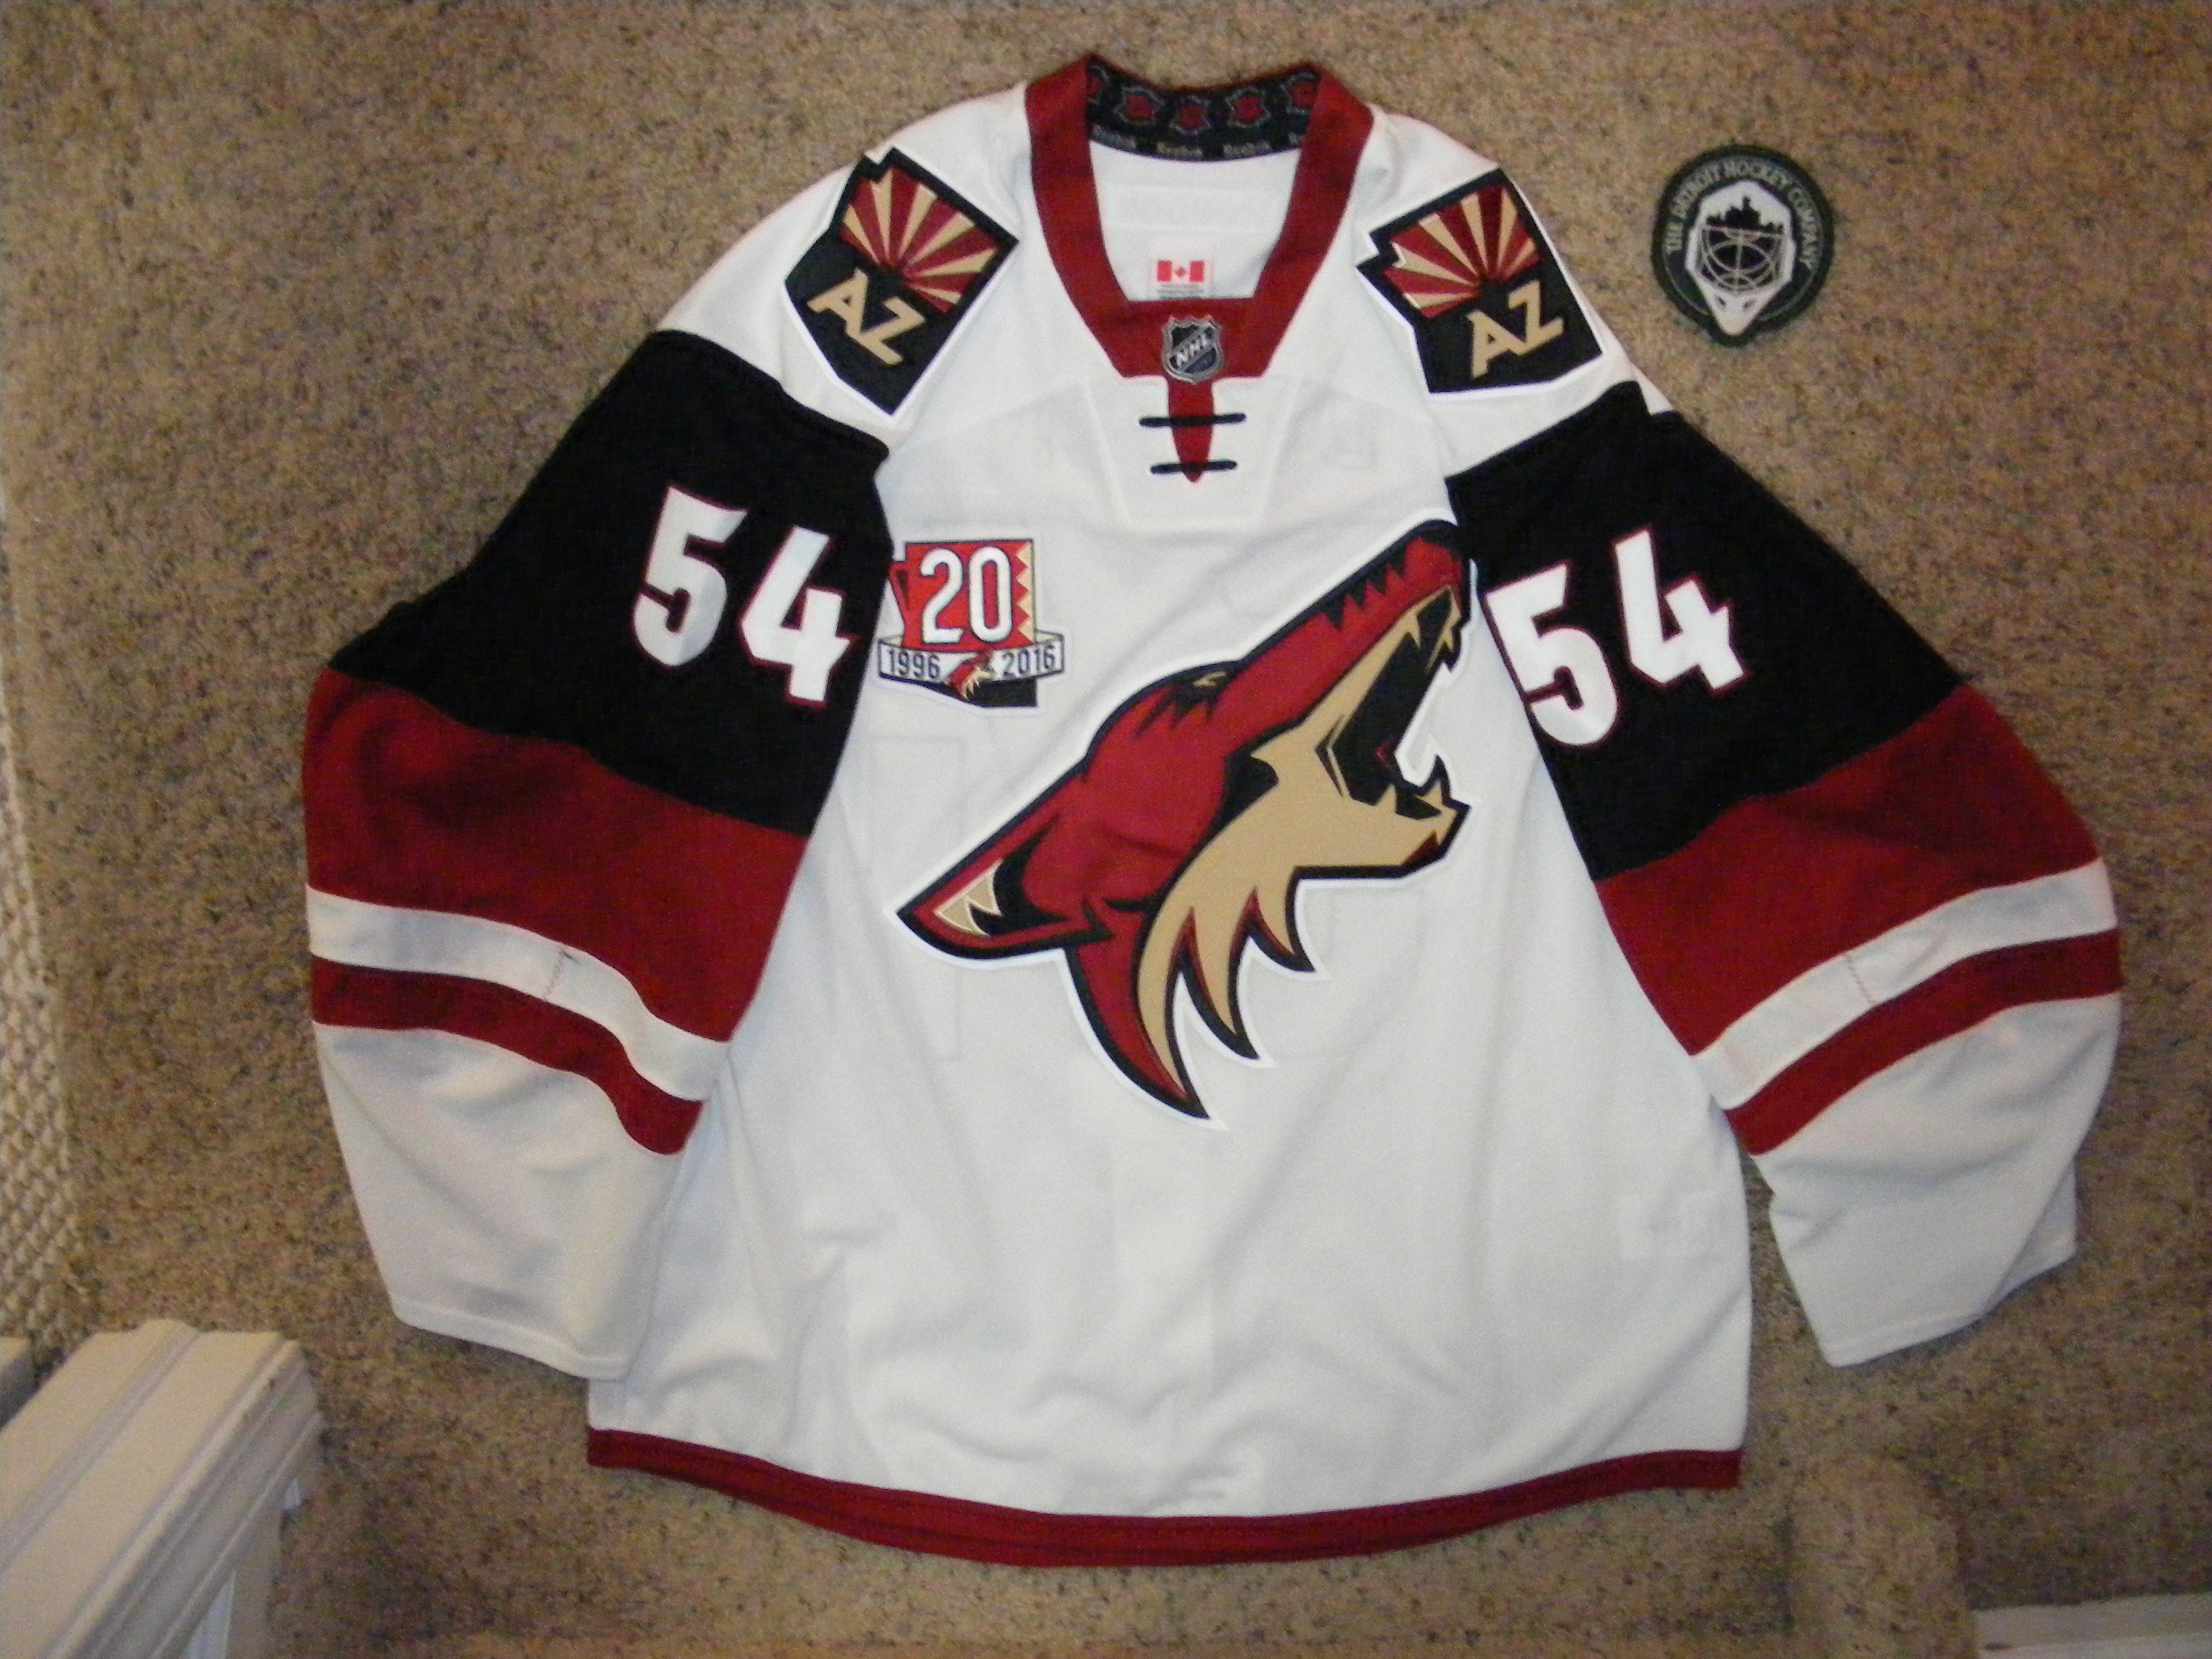 Utah Grizzlies (ECHL) 19-20 Jerseys. Definitly going to have to